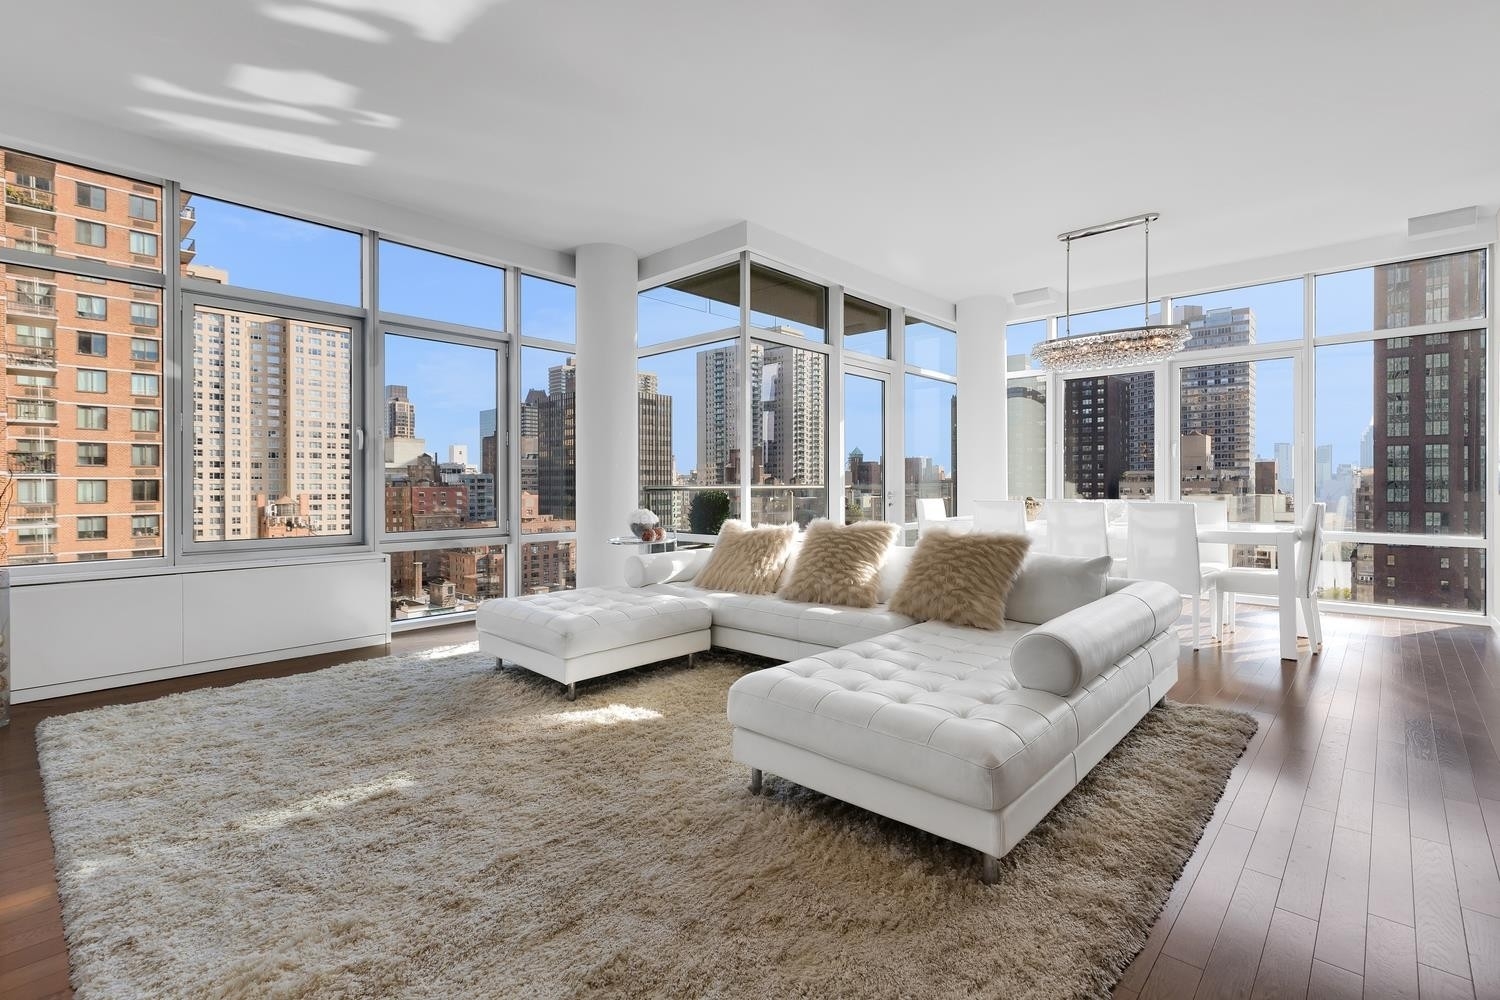 1. Condominiums for Sale at 310 E 53RD ST, 18A Turtle Bay, New York, New York 10022